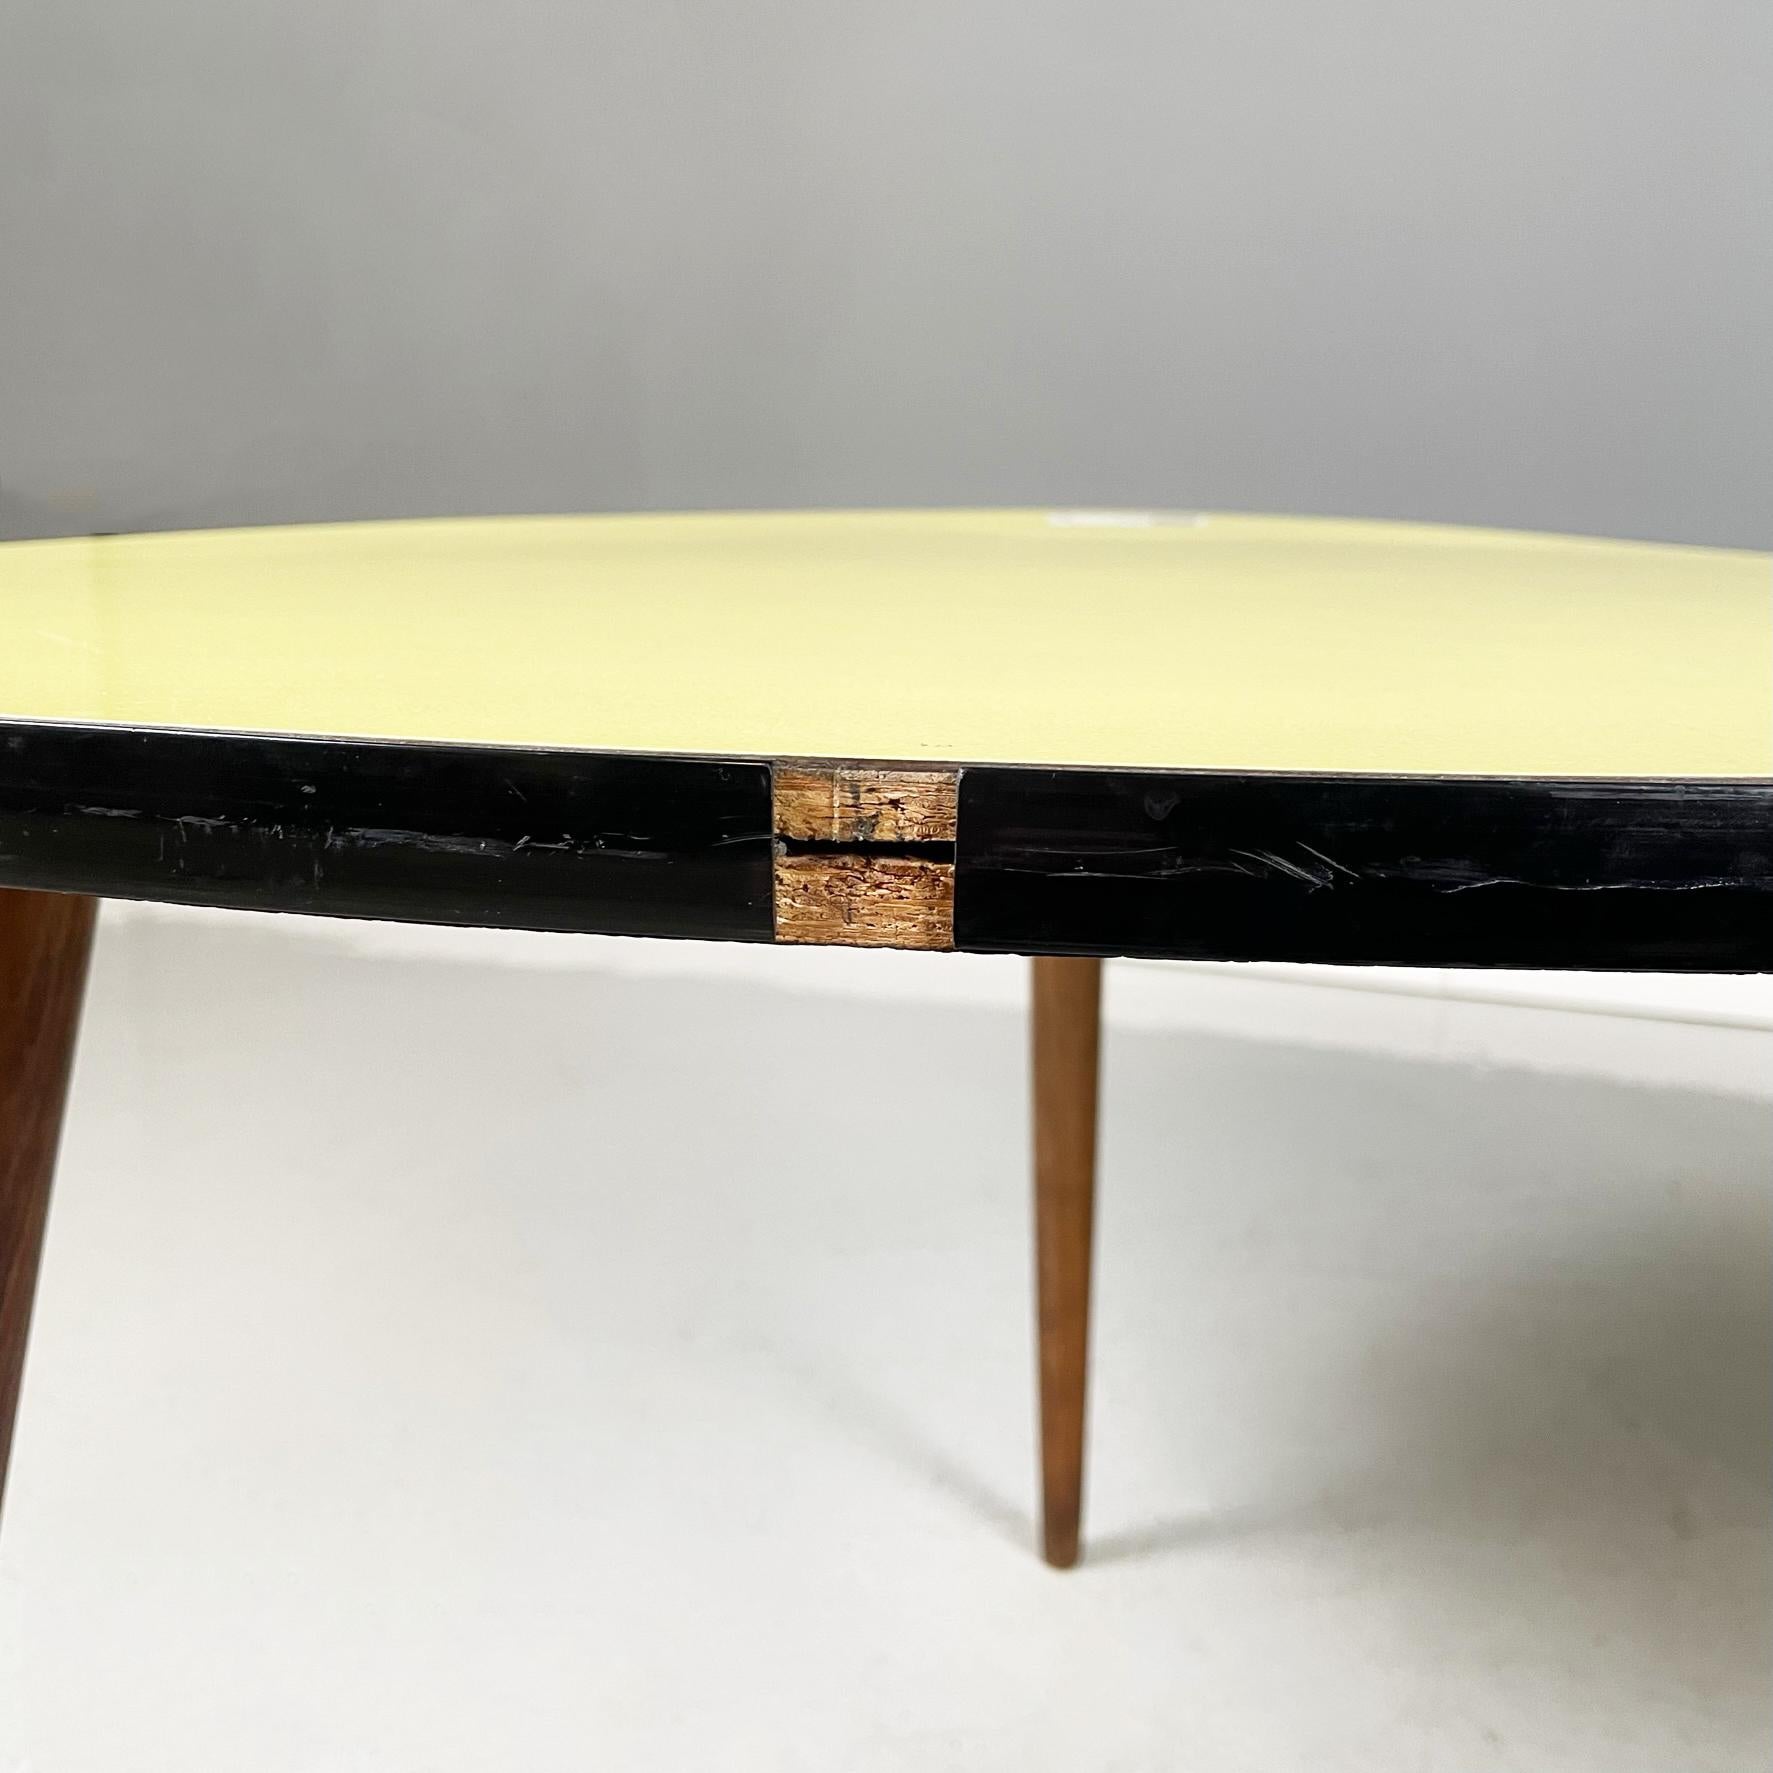 Northern European Midcentury Wood Yellow and Black Formica Coffee Tables, 1960s For Sale 2